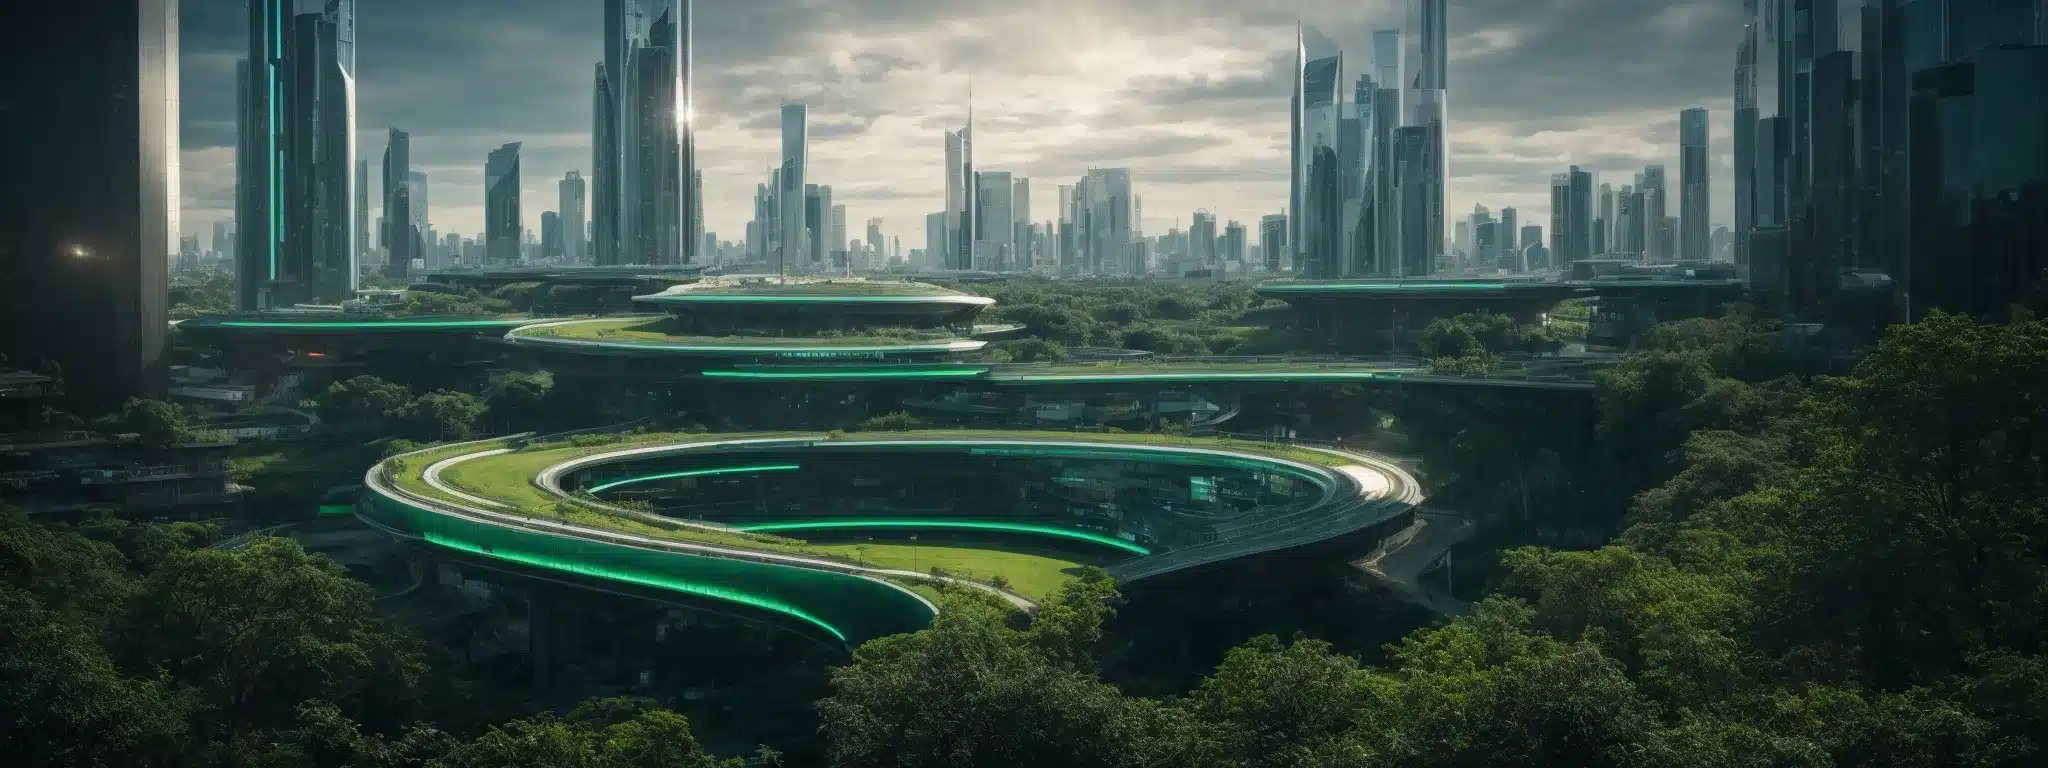 A Futuristic City Skyline With Sleek, Sustainable Buildings And Green Spaces Under A Dynamic, Technological Aurora.